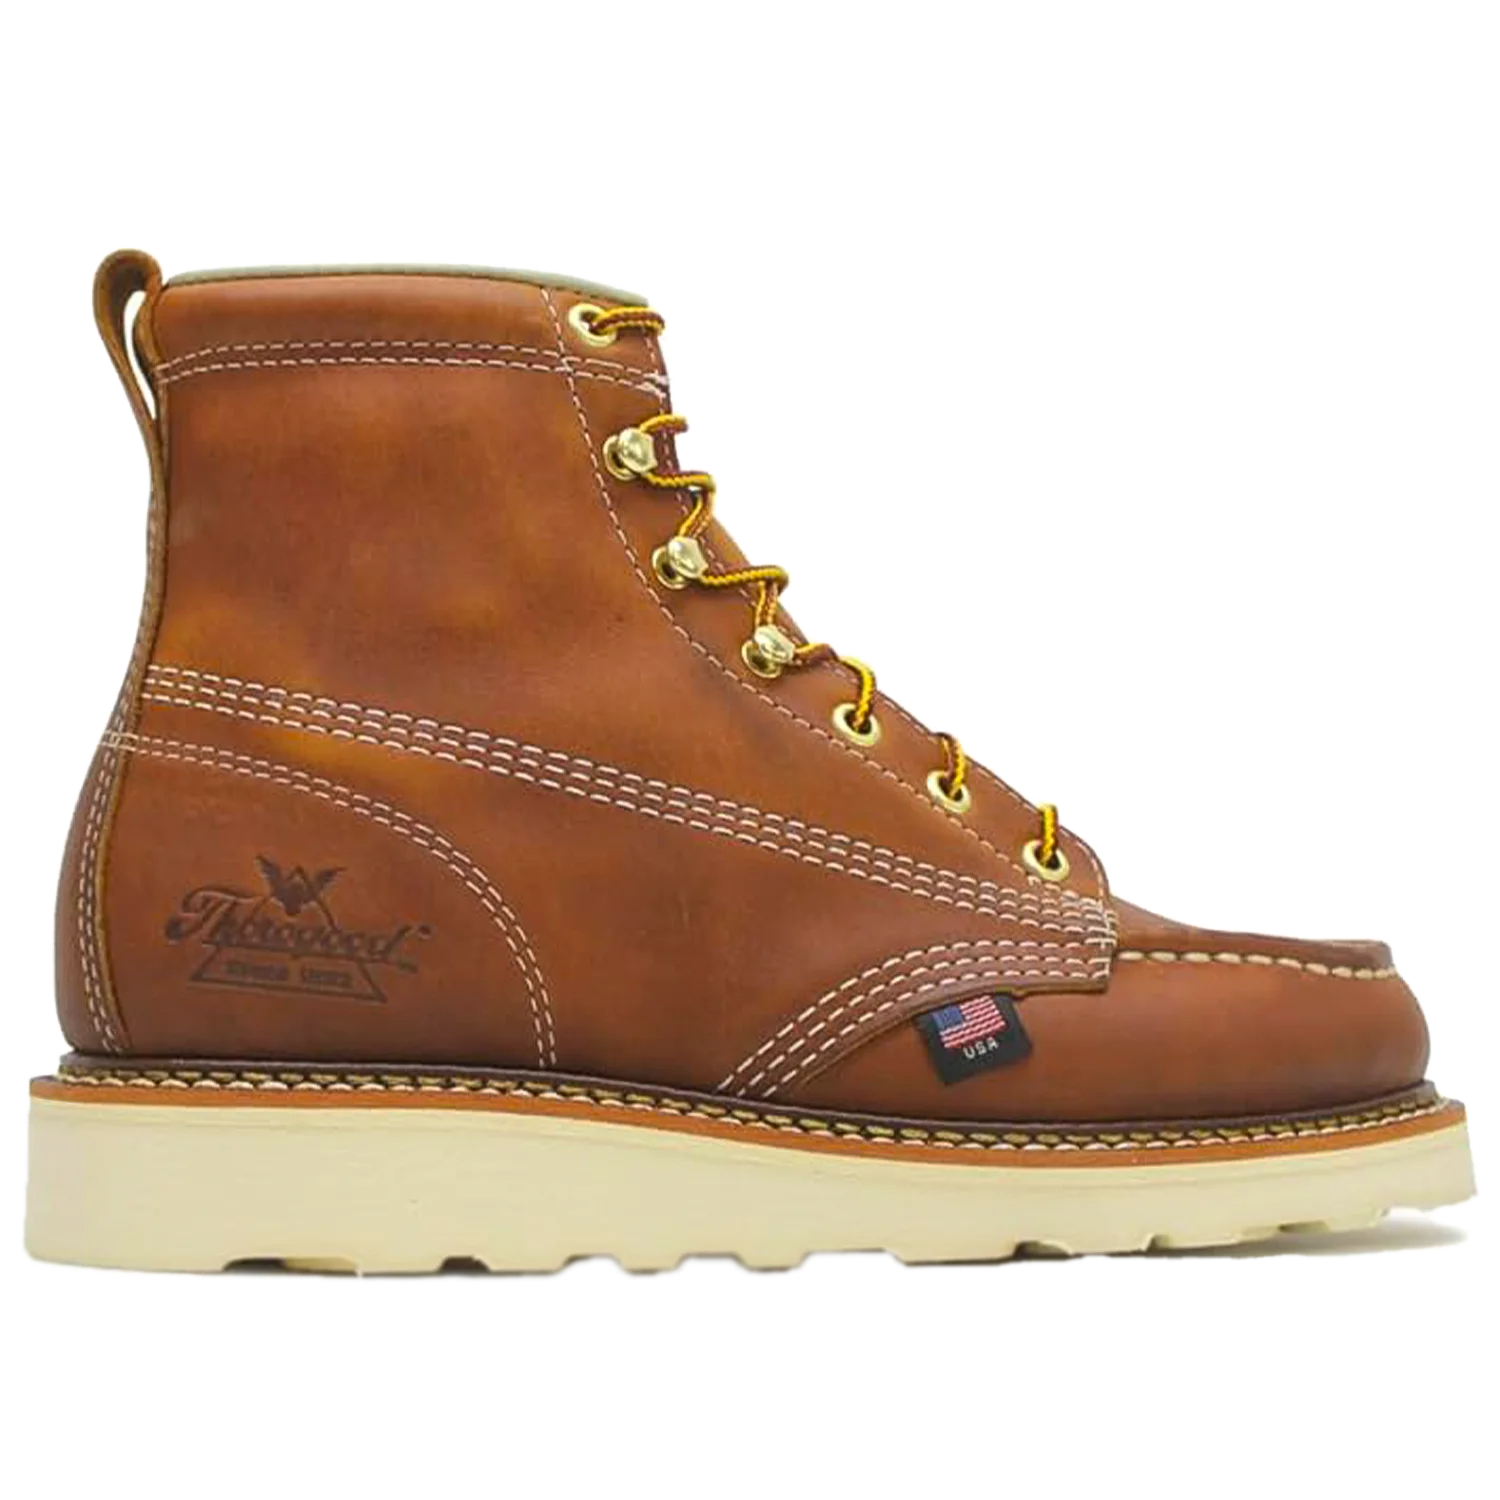 Thorogood American Heritage 6” Moc Toe Work Boots for Men - Soft Toe, Premium Full-Grain Leather with Slip-Resistant Wedge Outsole and Comfort Insole; EH Rated
